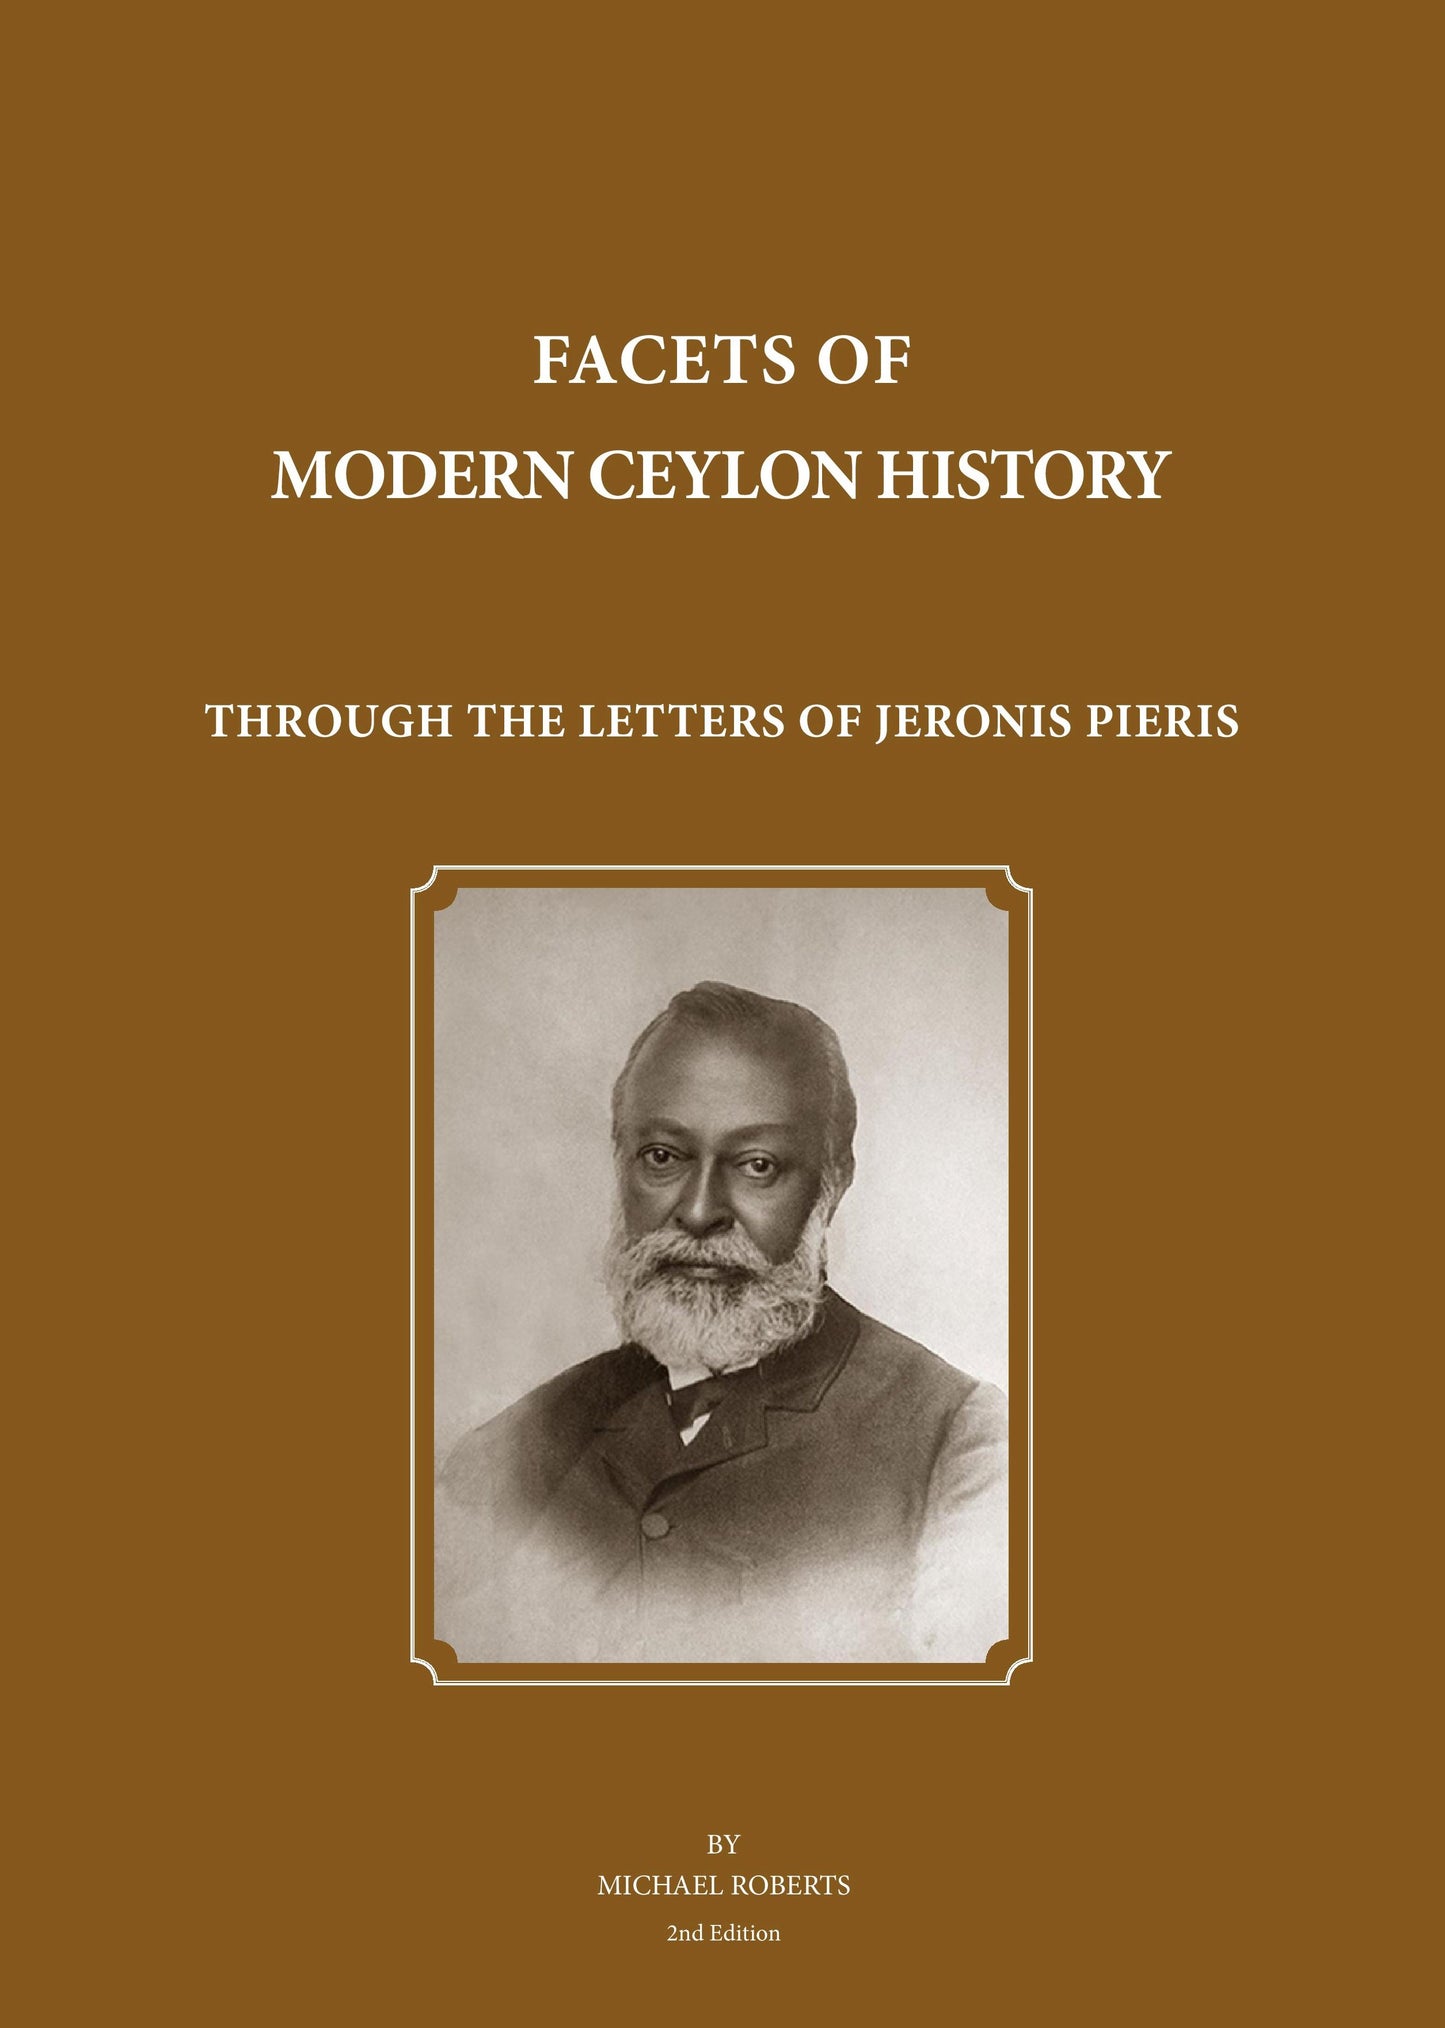 Facets Of Modern Ceylon History by Michael Roberts.